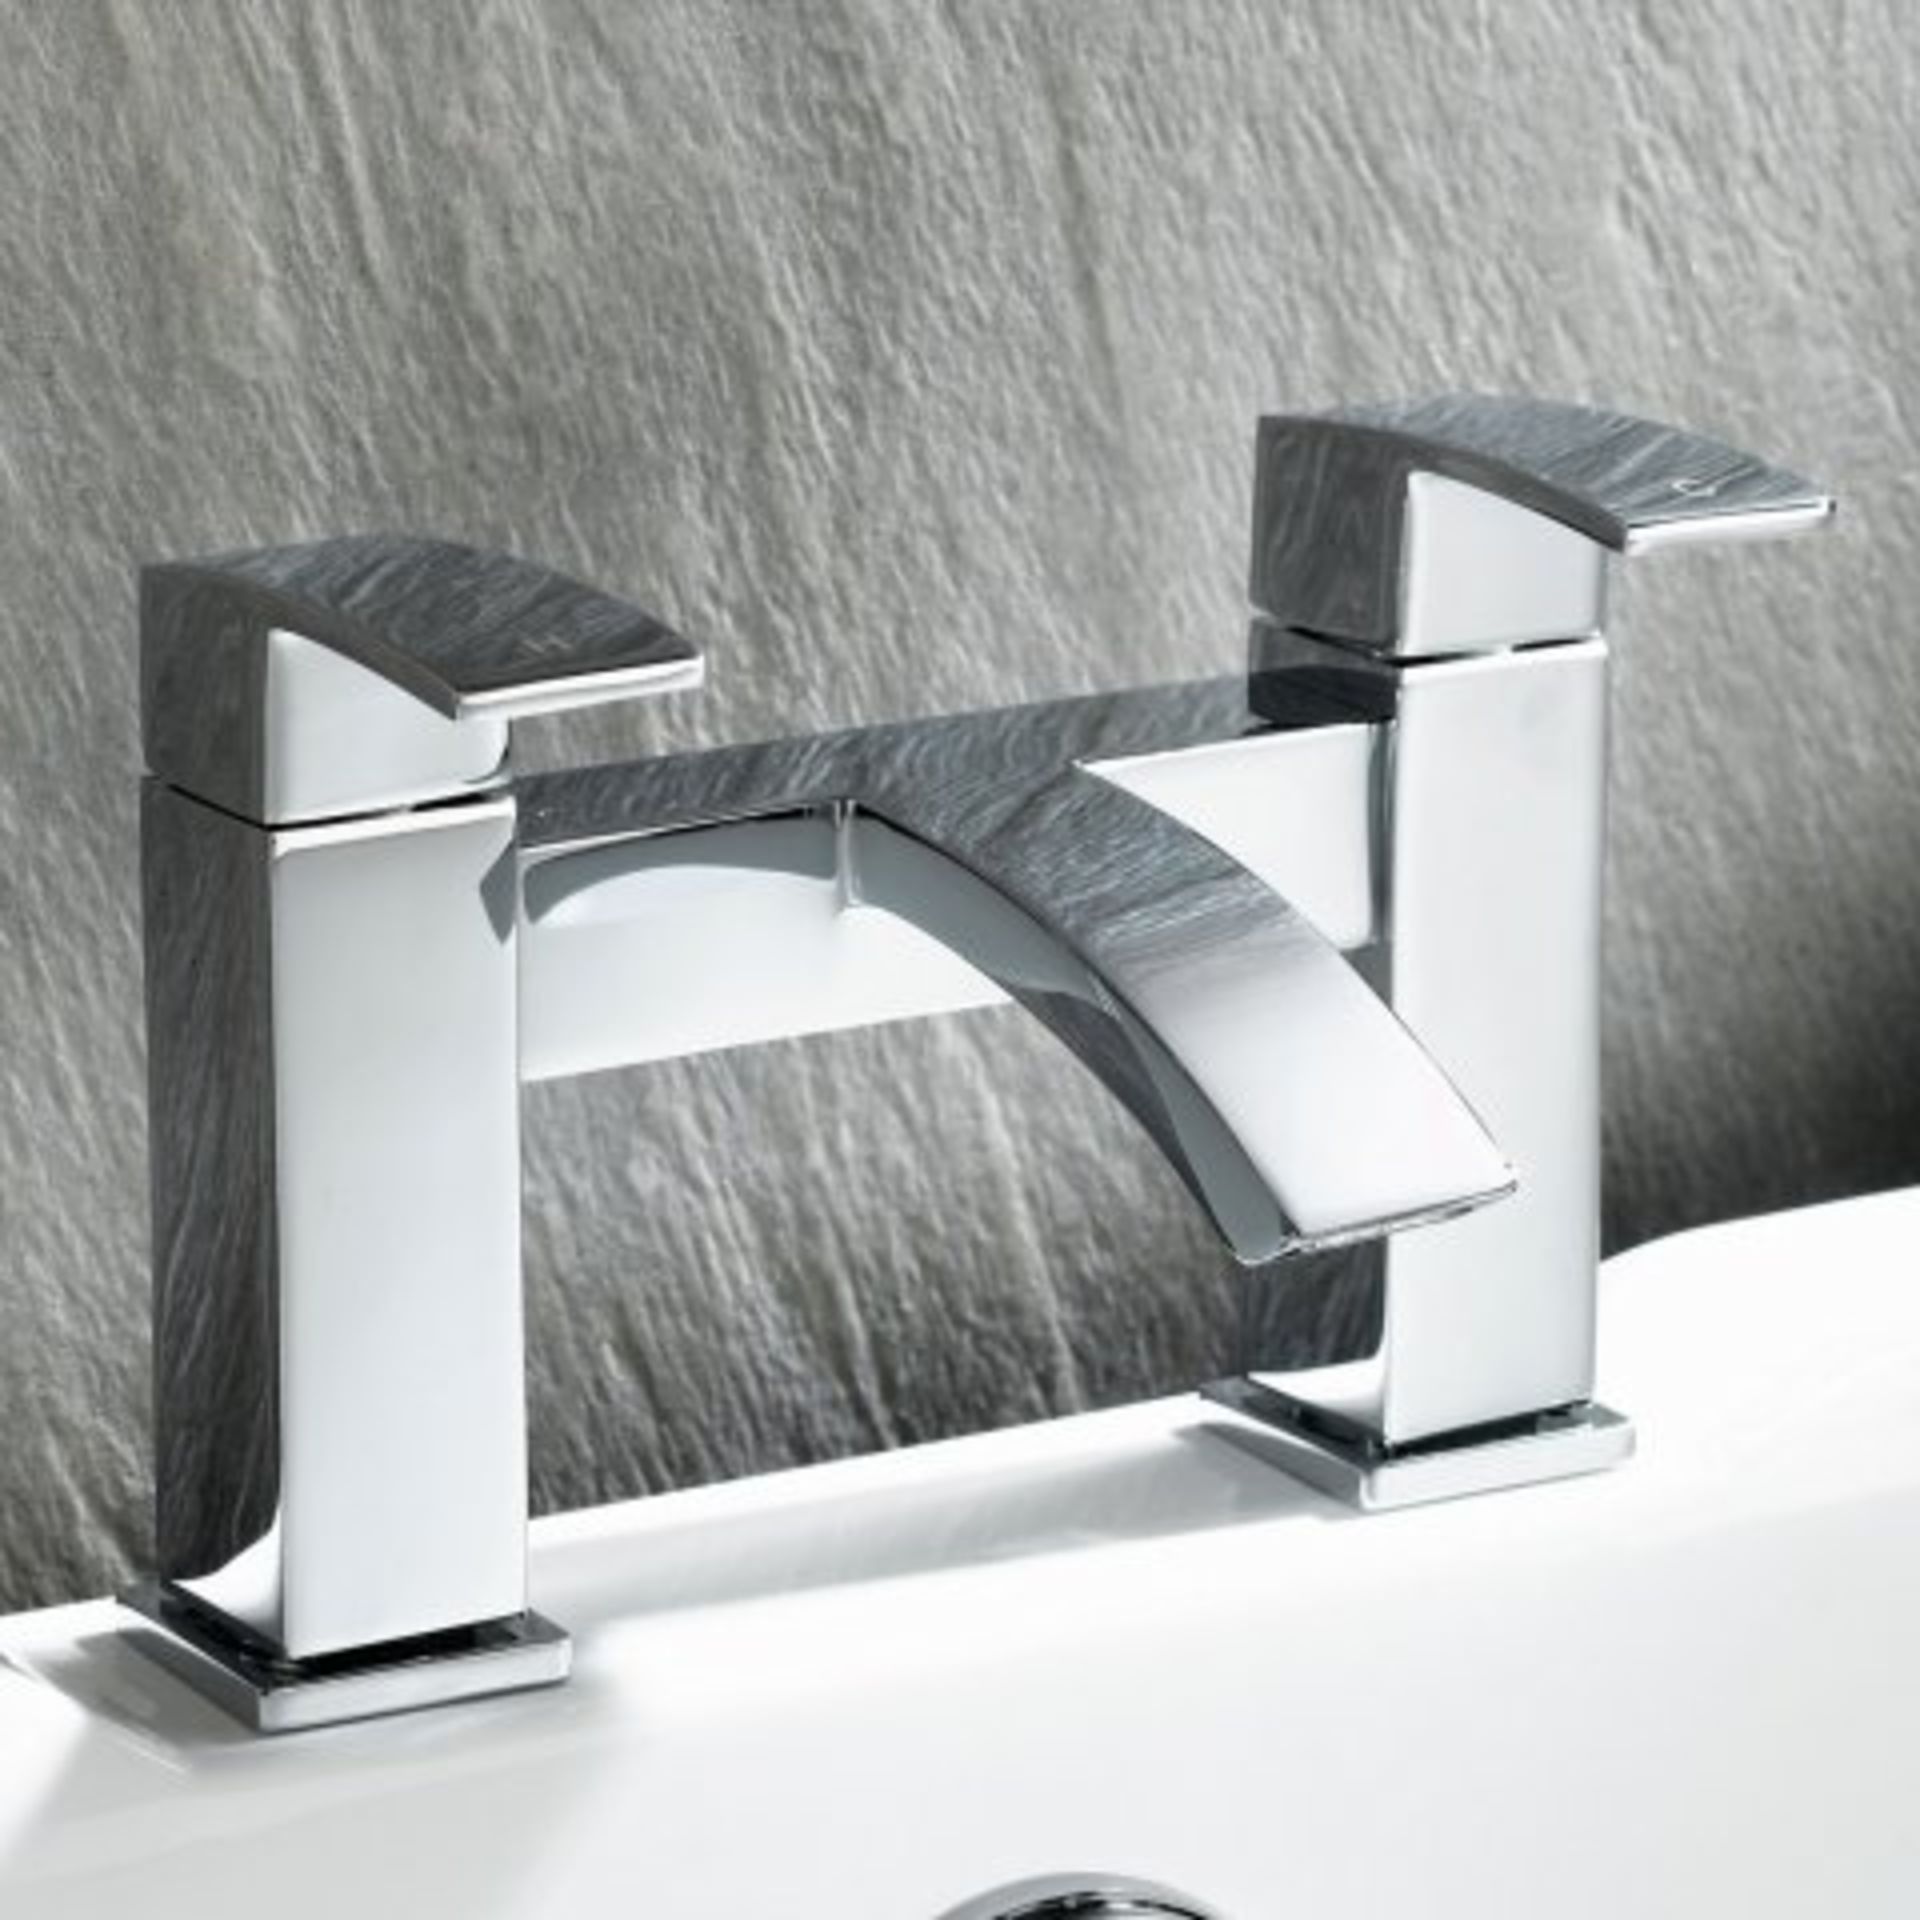 (I318) Keila Bath Mixer Tap. RRP £161.99. Presenting a contemporary design, this solid brass tap has